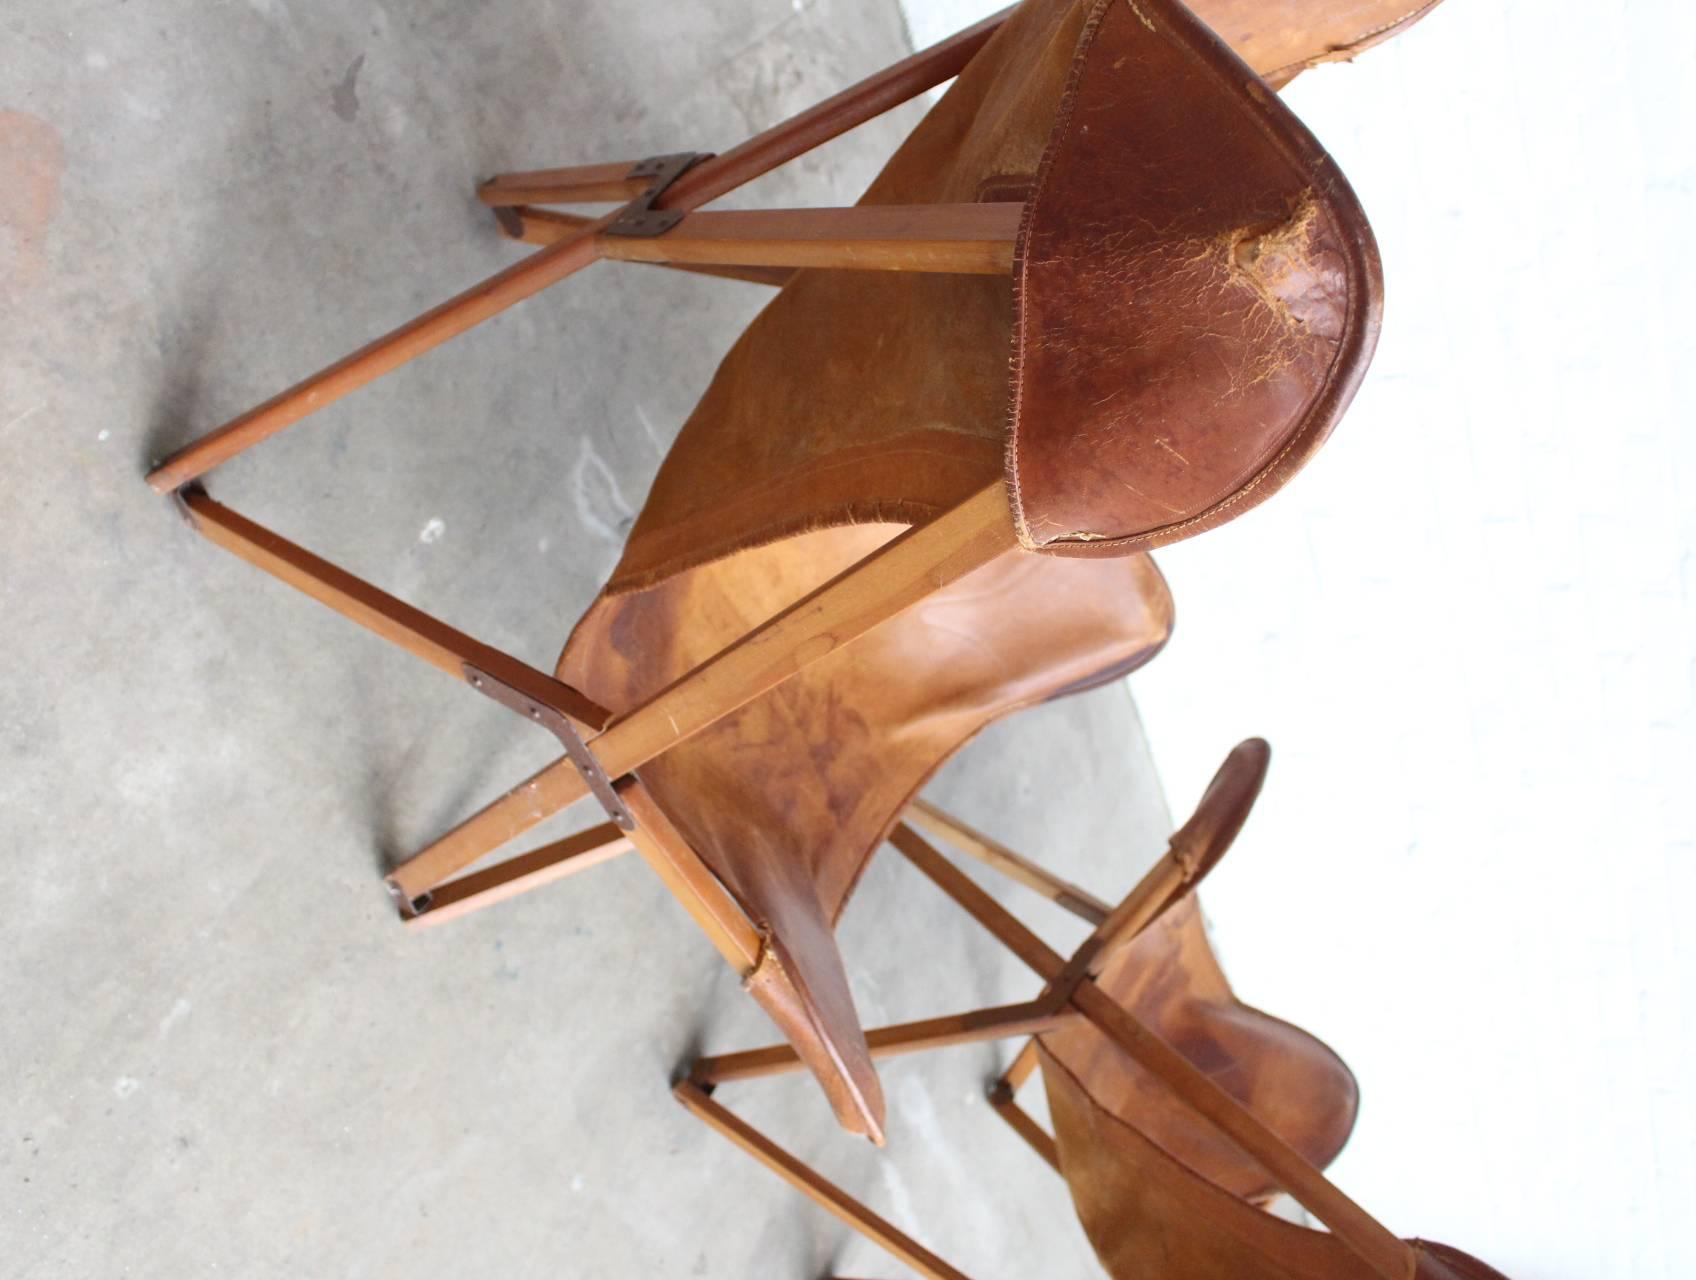 Woodwork Very Rare Original 'Tripolina' Chairs by Joseph Fendy for Paolo Viganò, Signed For Sale